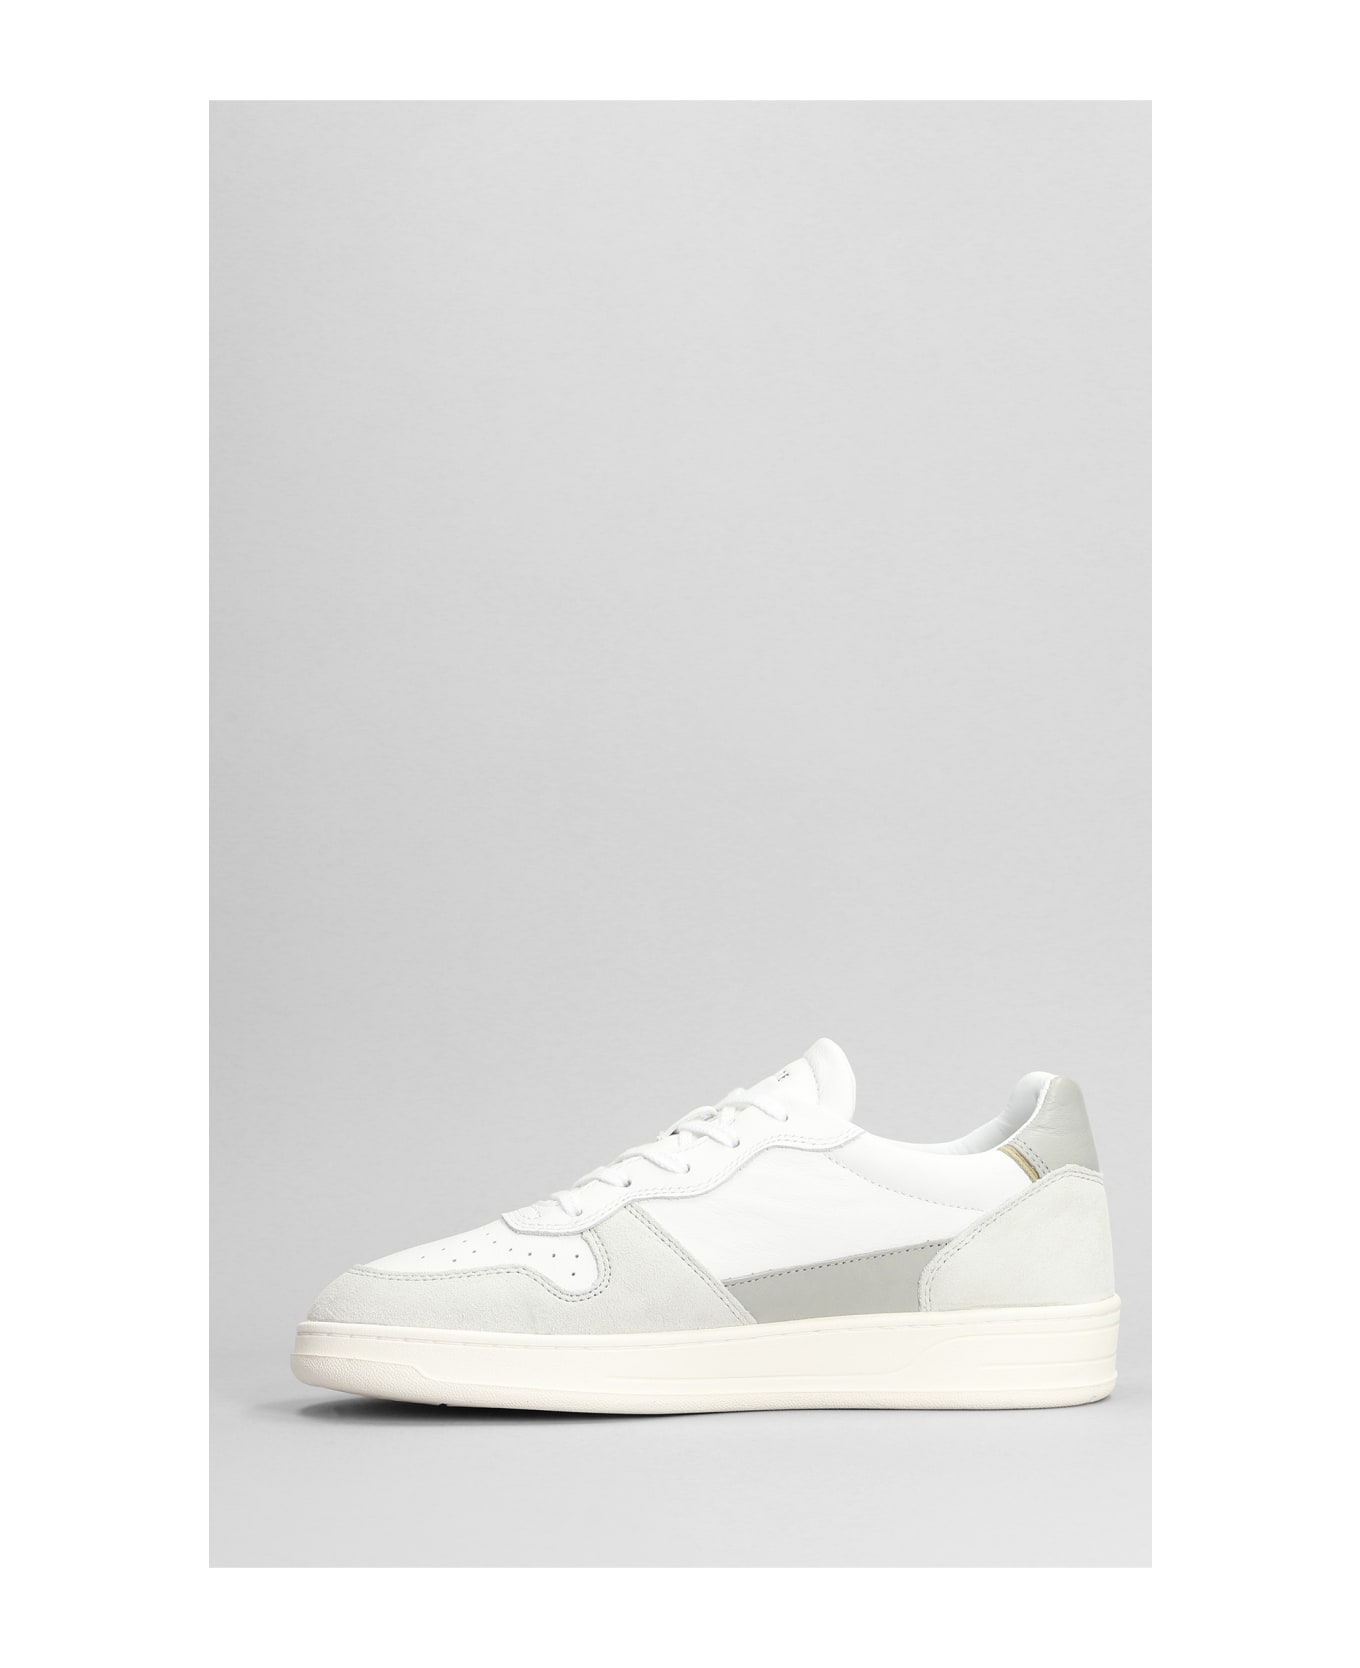 D.A.T.E. Court 2.0 Sneakers In White Suede And Leather - white スニーカー